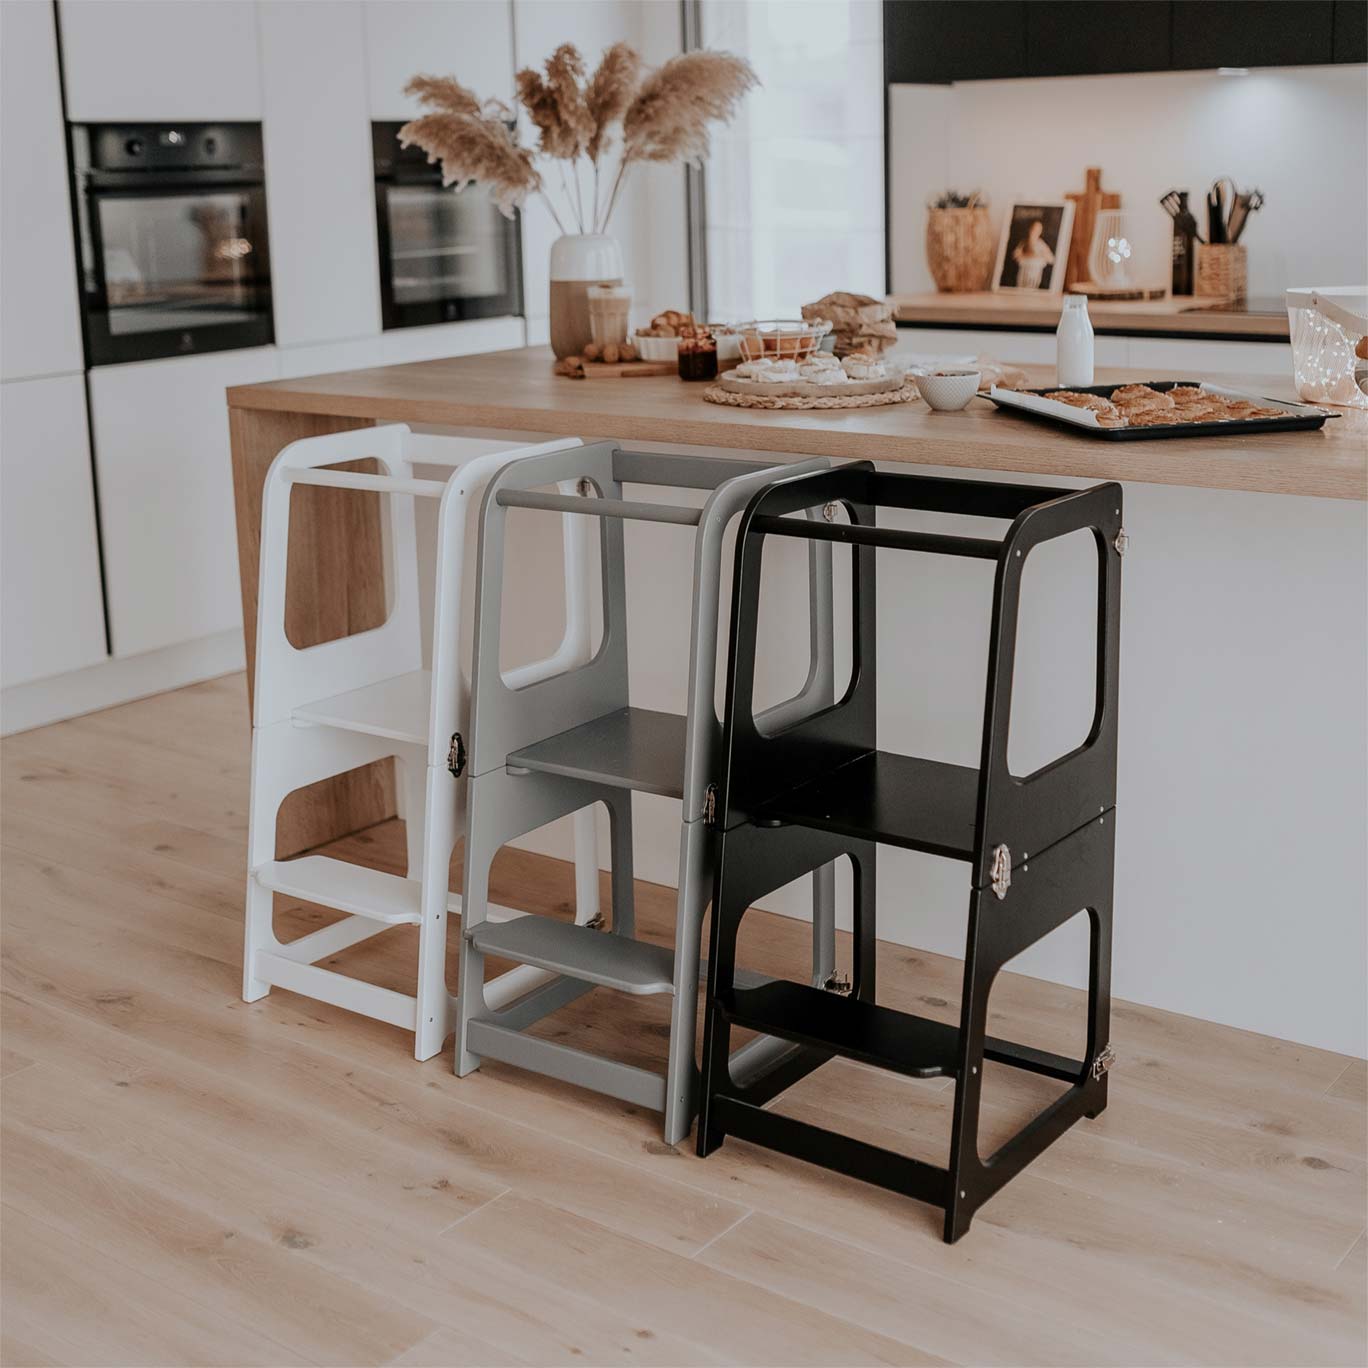 Types of kitchen towers. 3 different collors for Kitchen tower products.